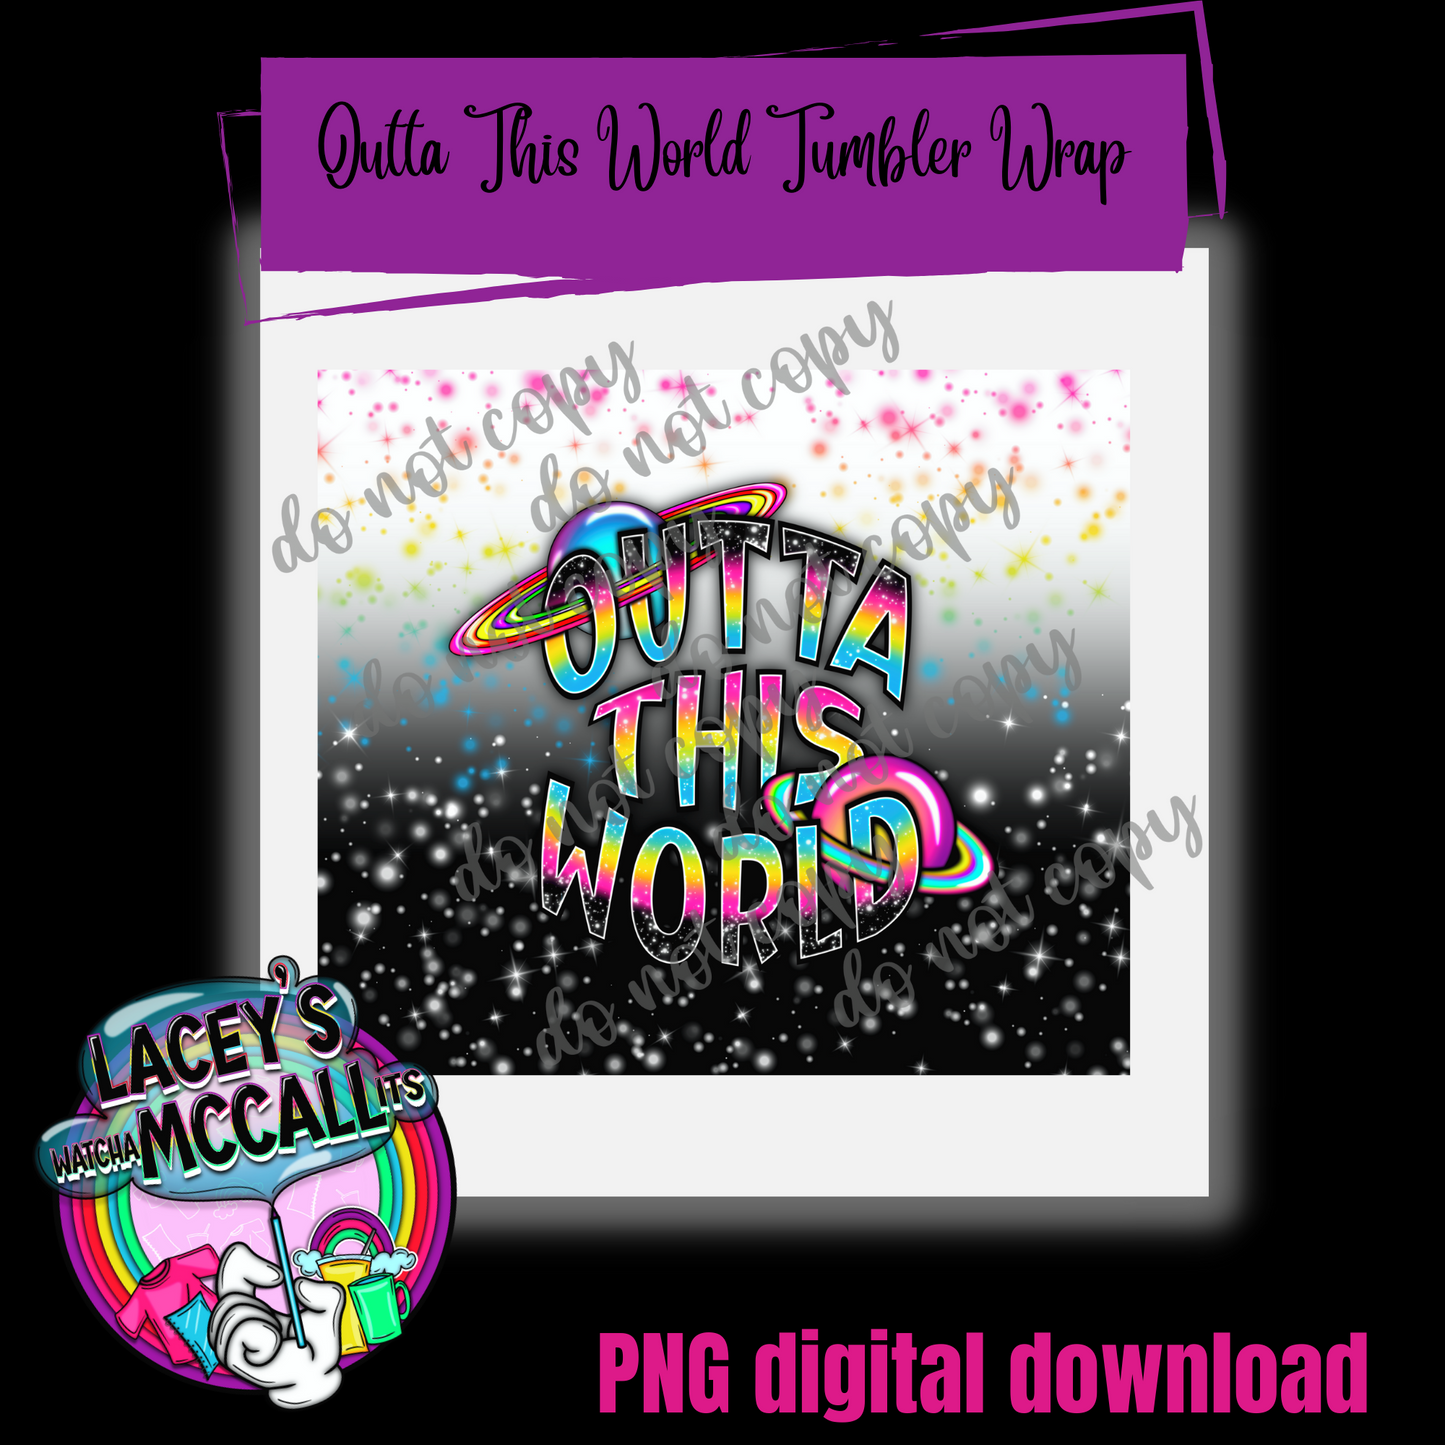 Outta This World Tumbler Wrap PNG